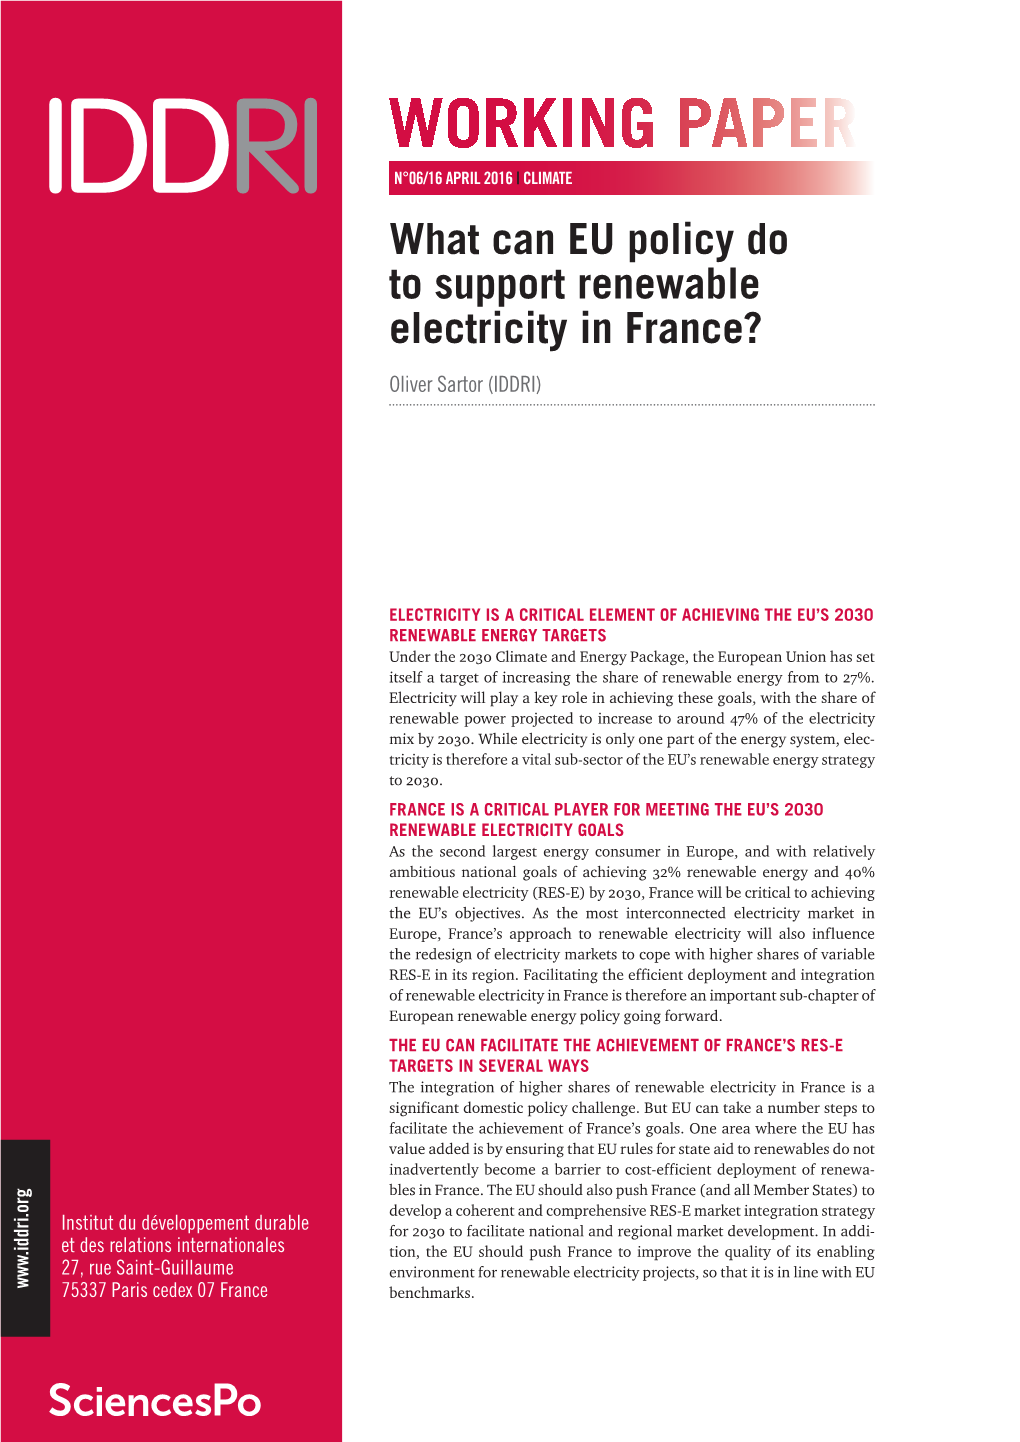 What Can EU Policy Do to Support Renewable Electricity in France? Oliver Sartor (IDDRI)